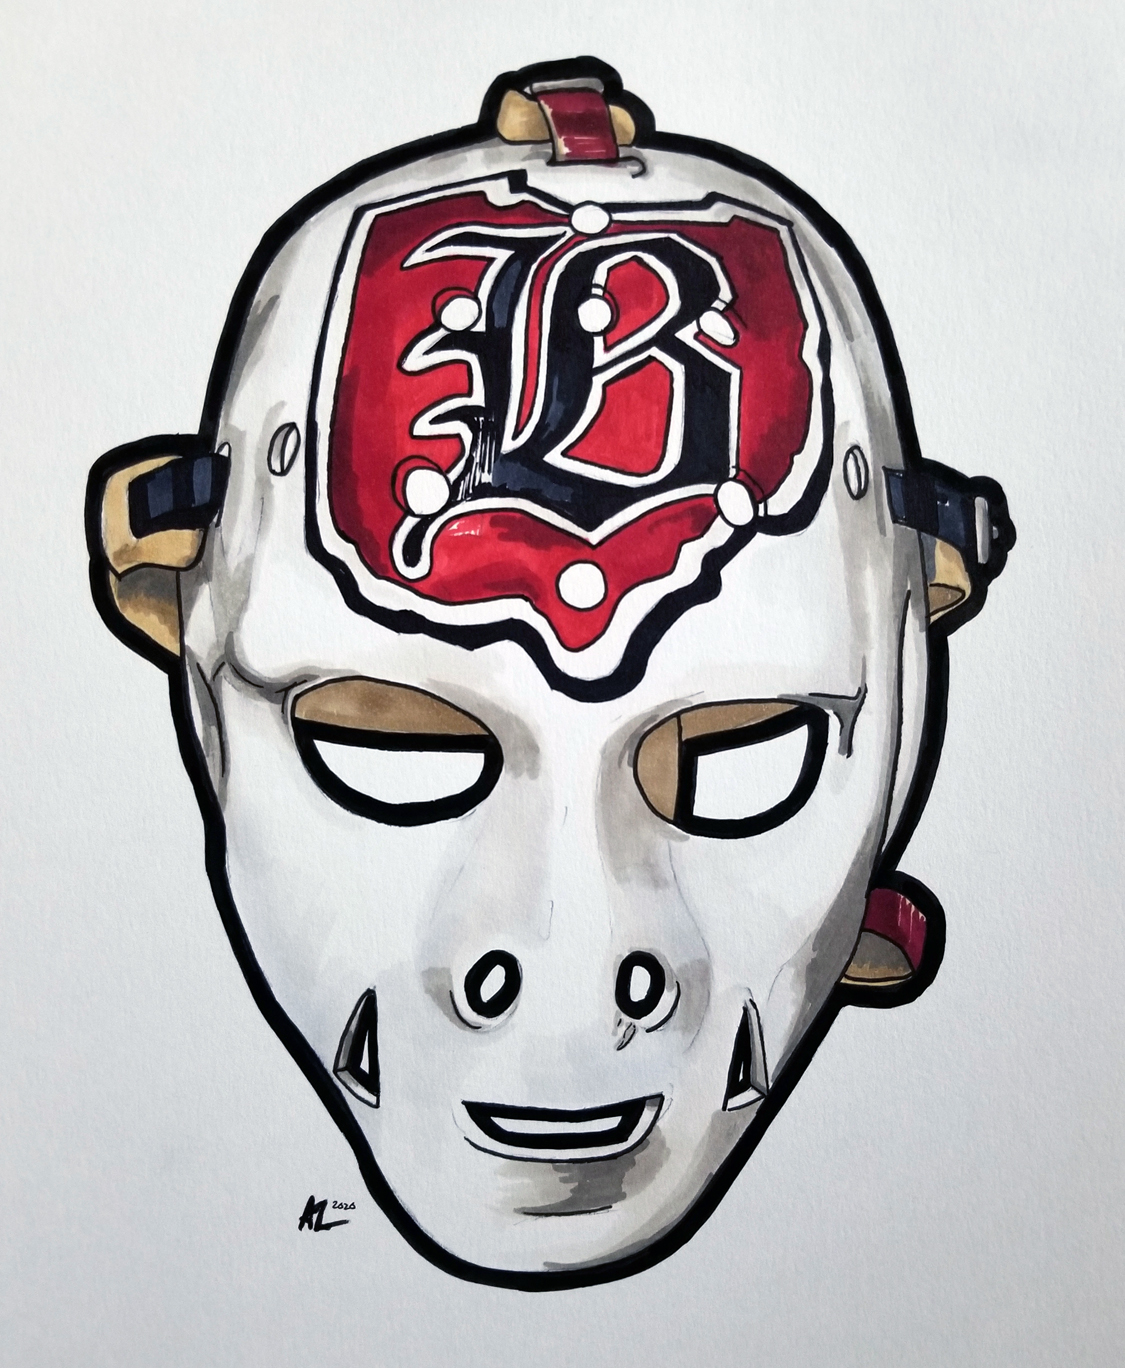 Pen and ink drawing of a goalie mask without cage and with black "B" and red outline of state of Ohio.